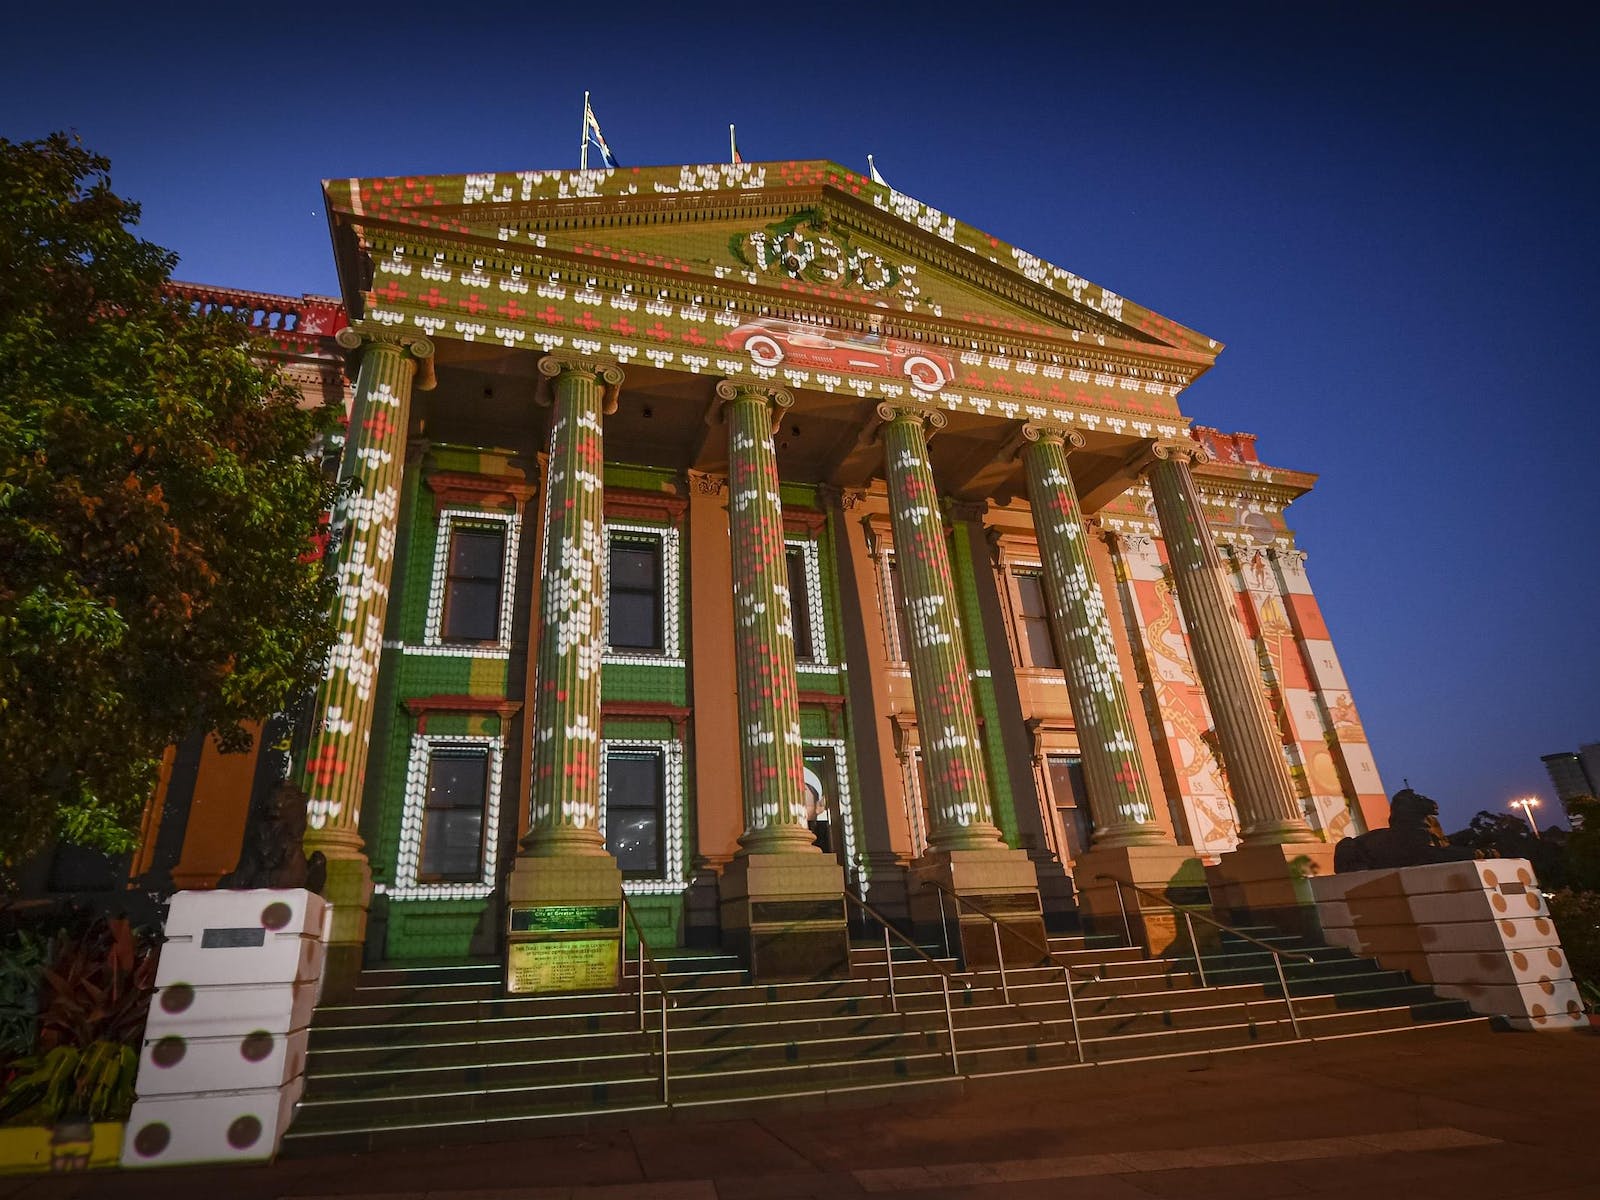 City Hall facade in Geelong is adorned with Christmas projections.